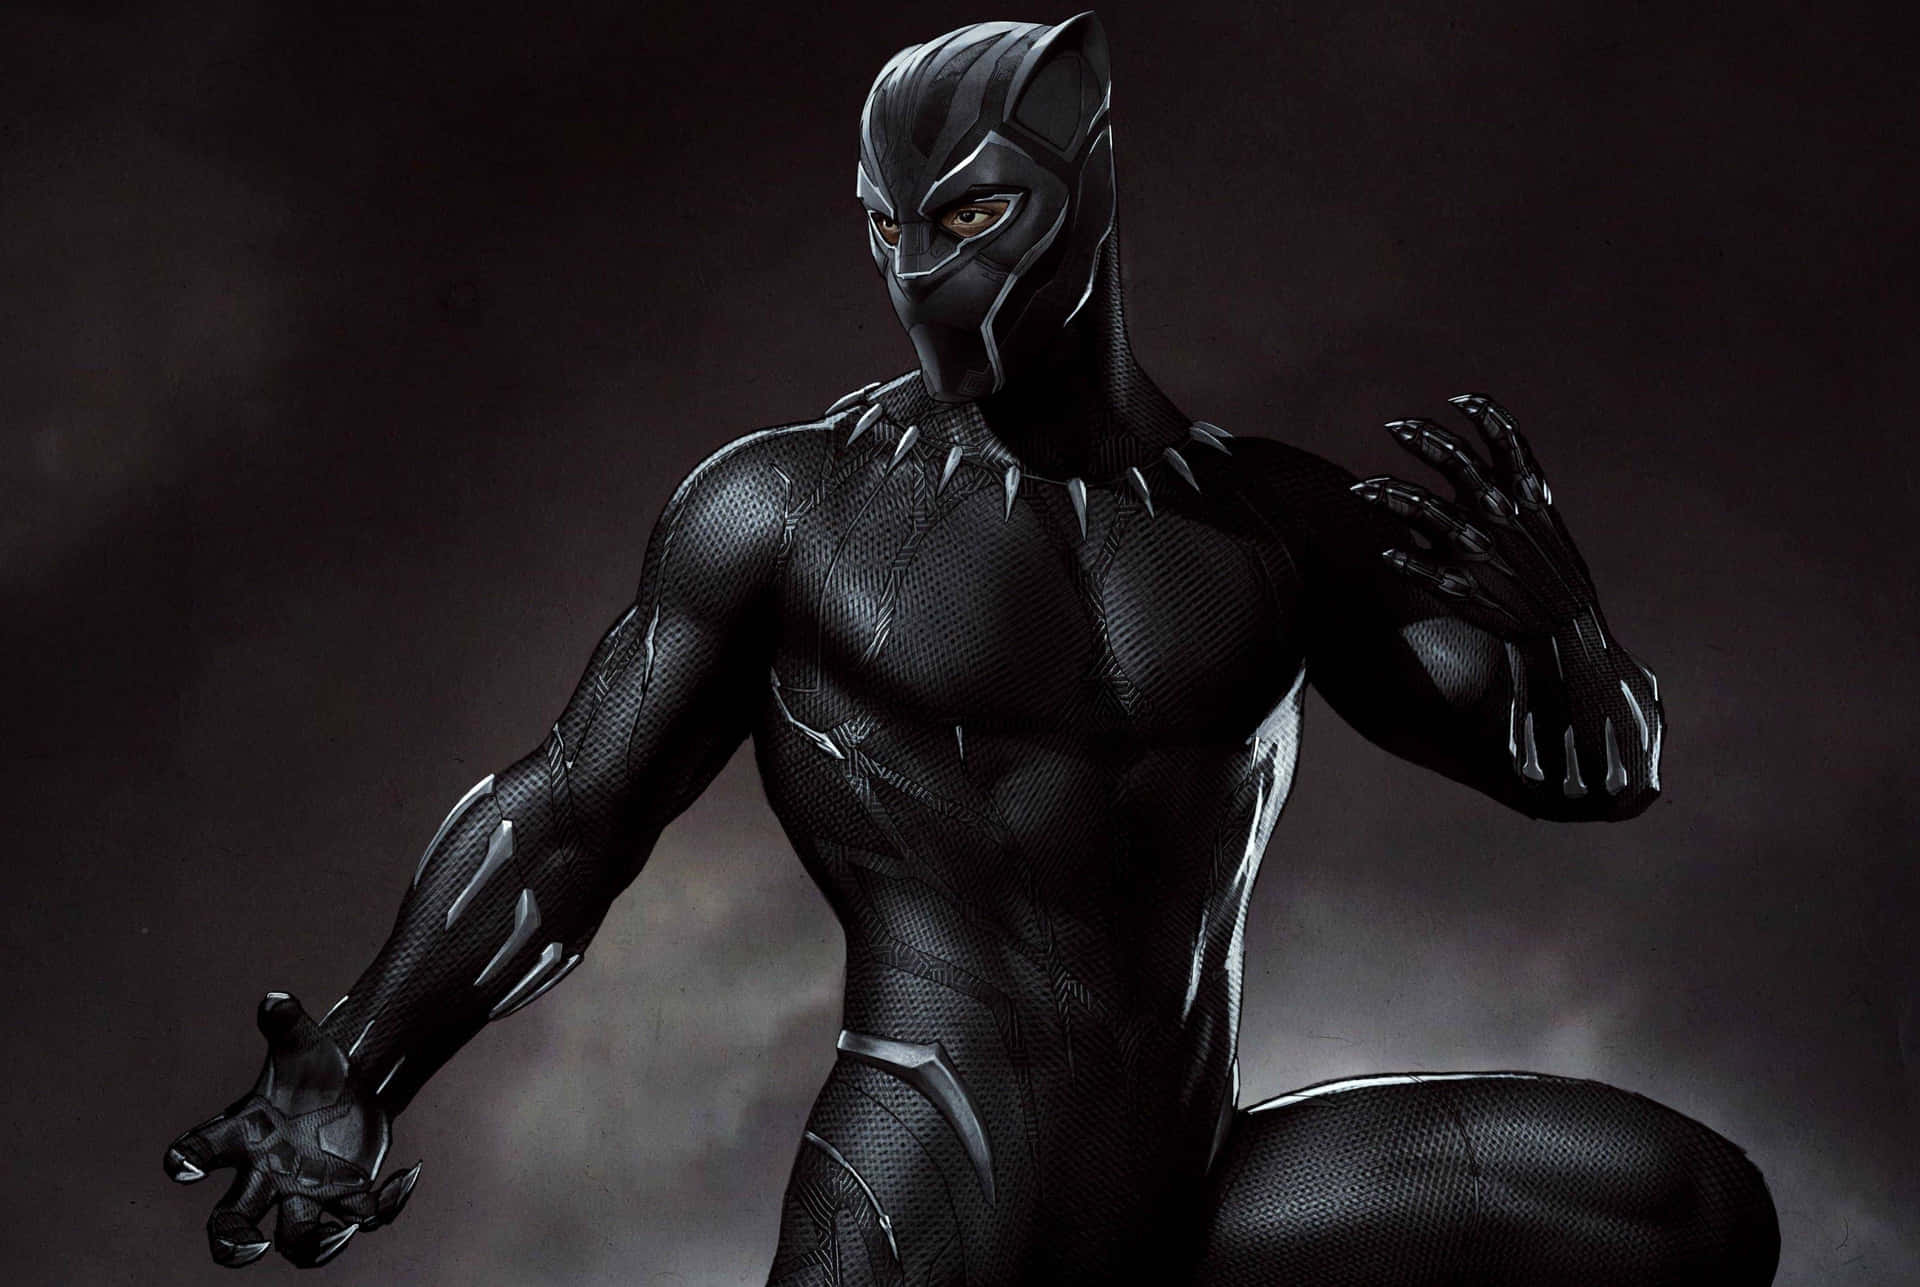 Little Black Panther! stock photo. Image of darkness - 234758296